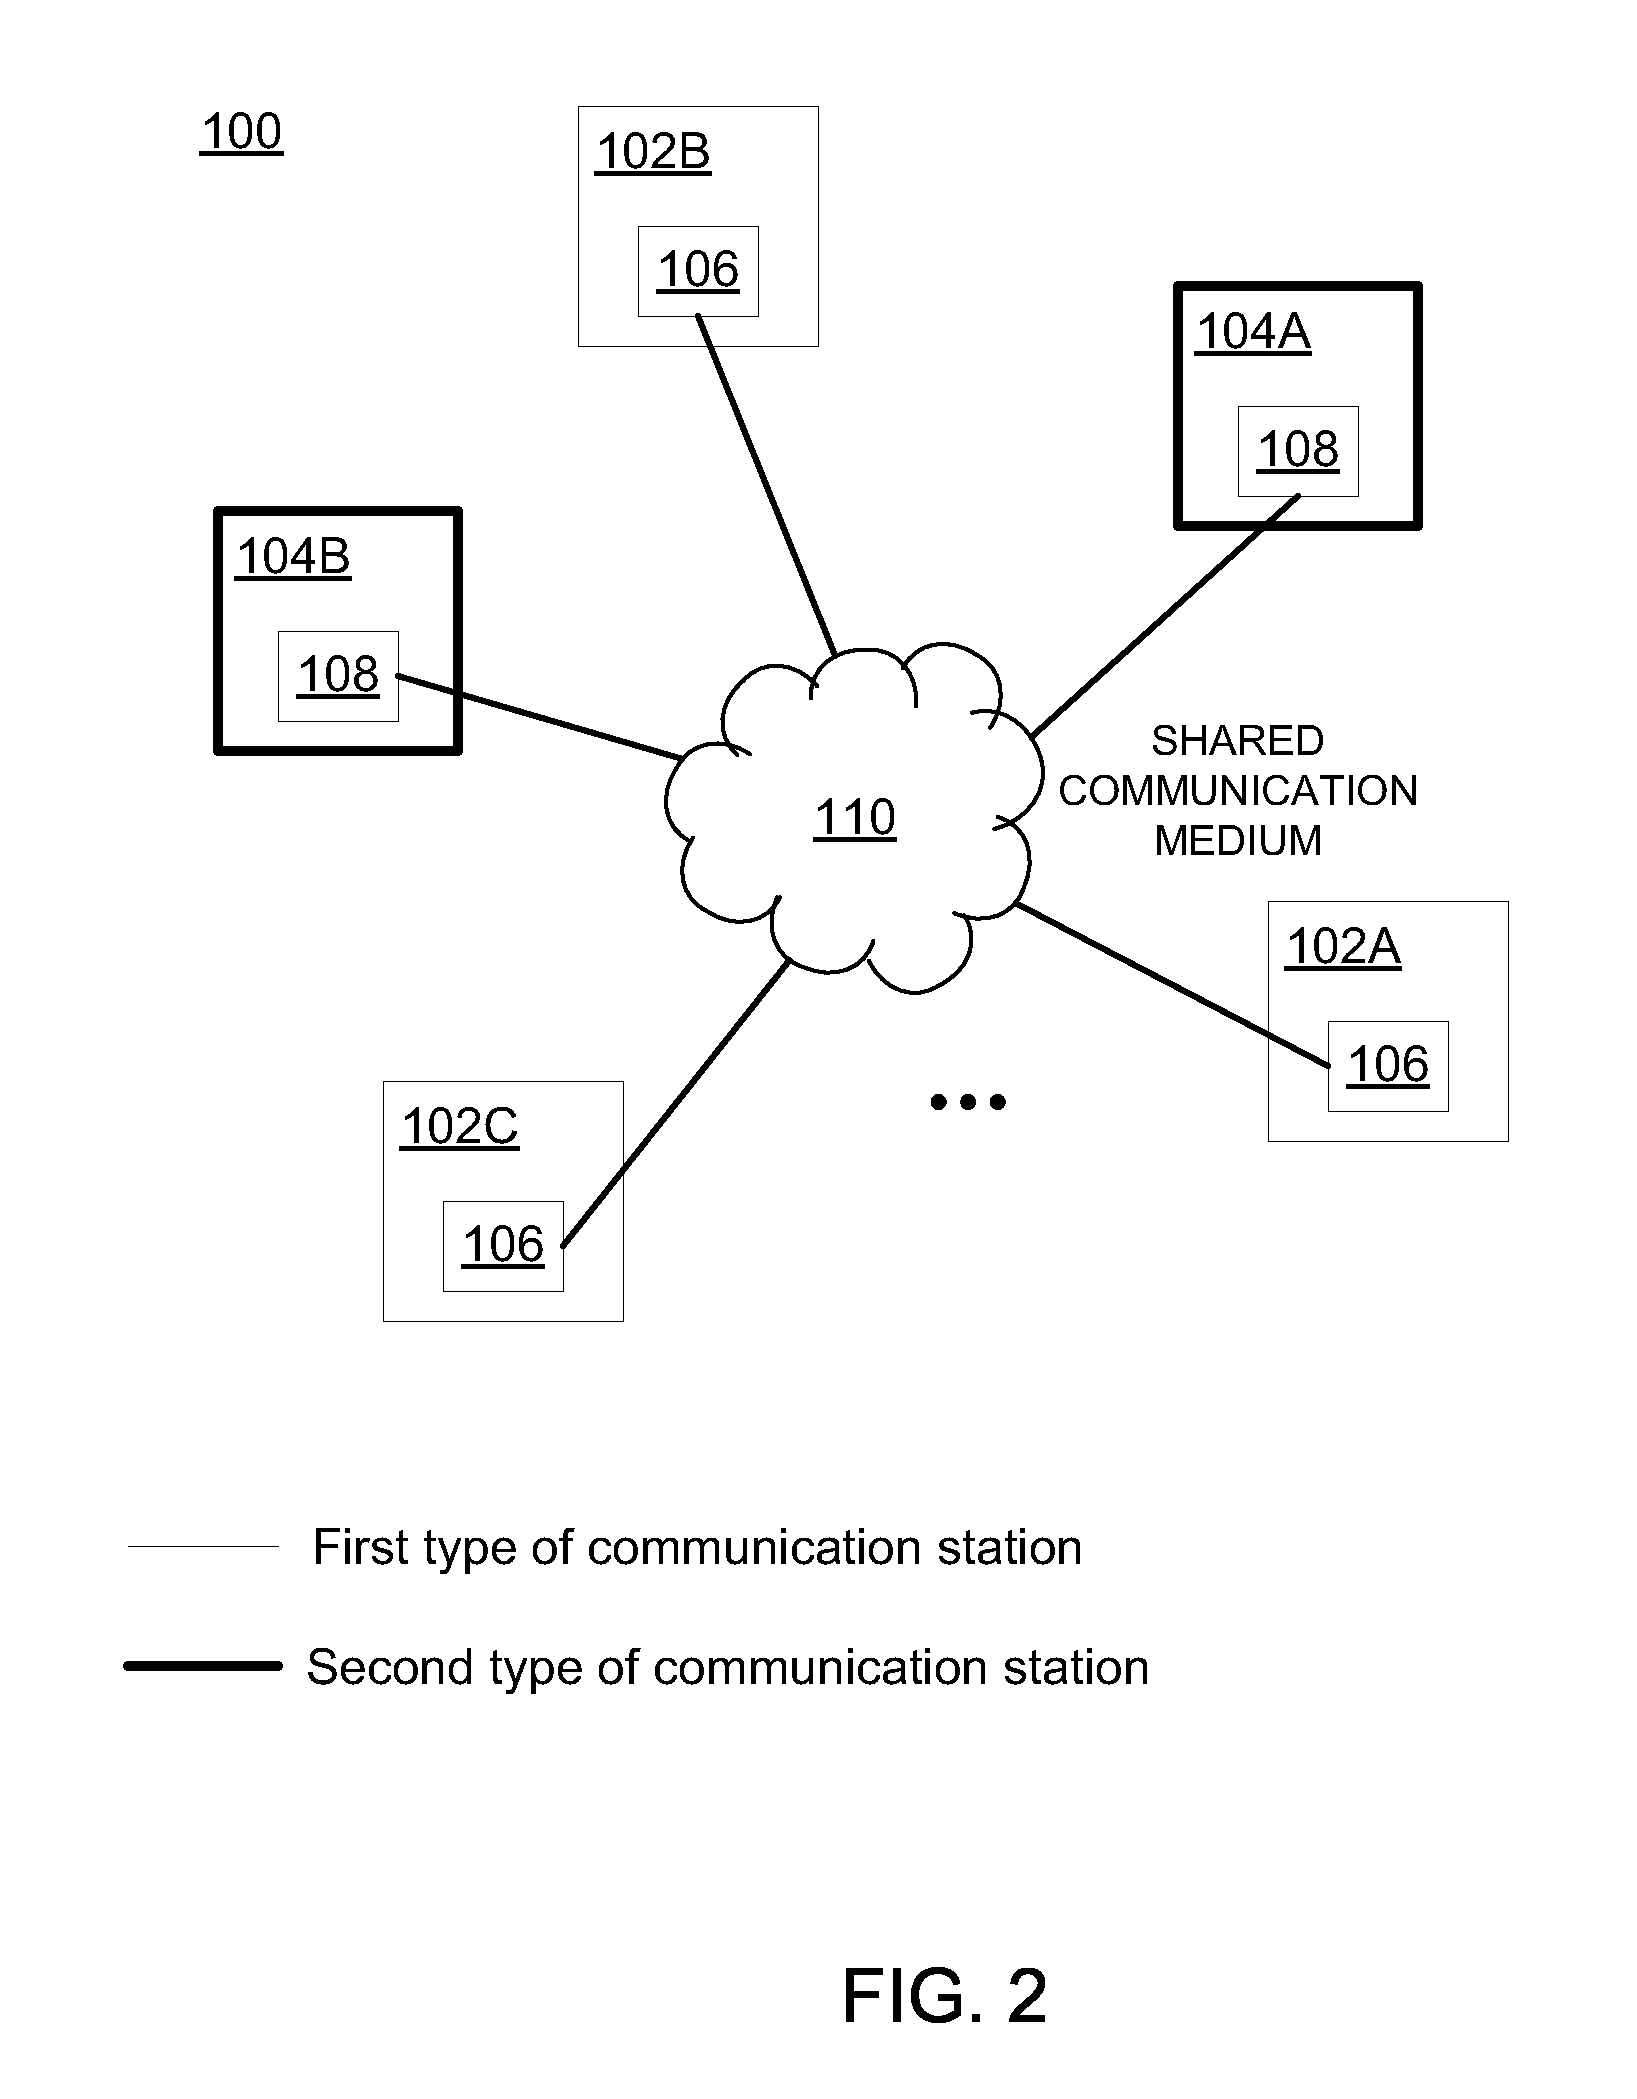 Communicating in a network that includes a medium having varying transmission characteristics